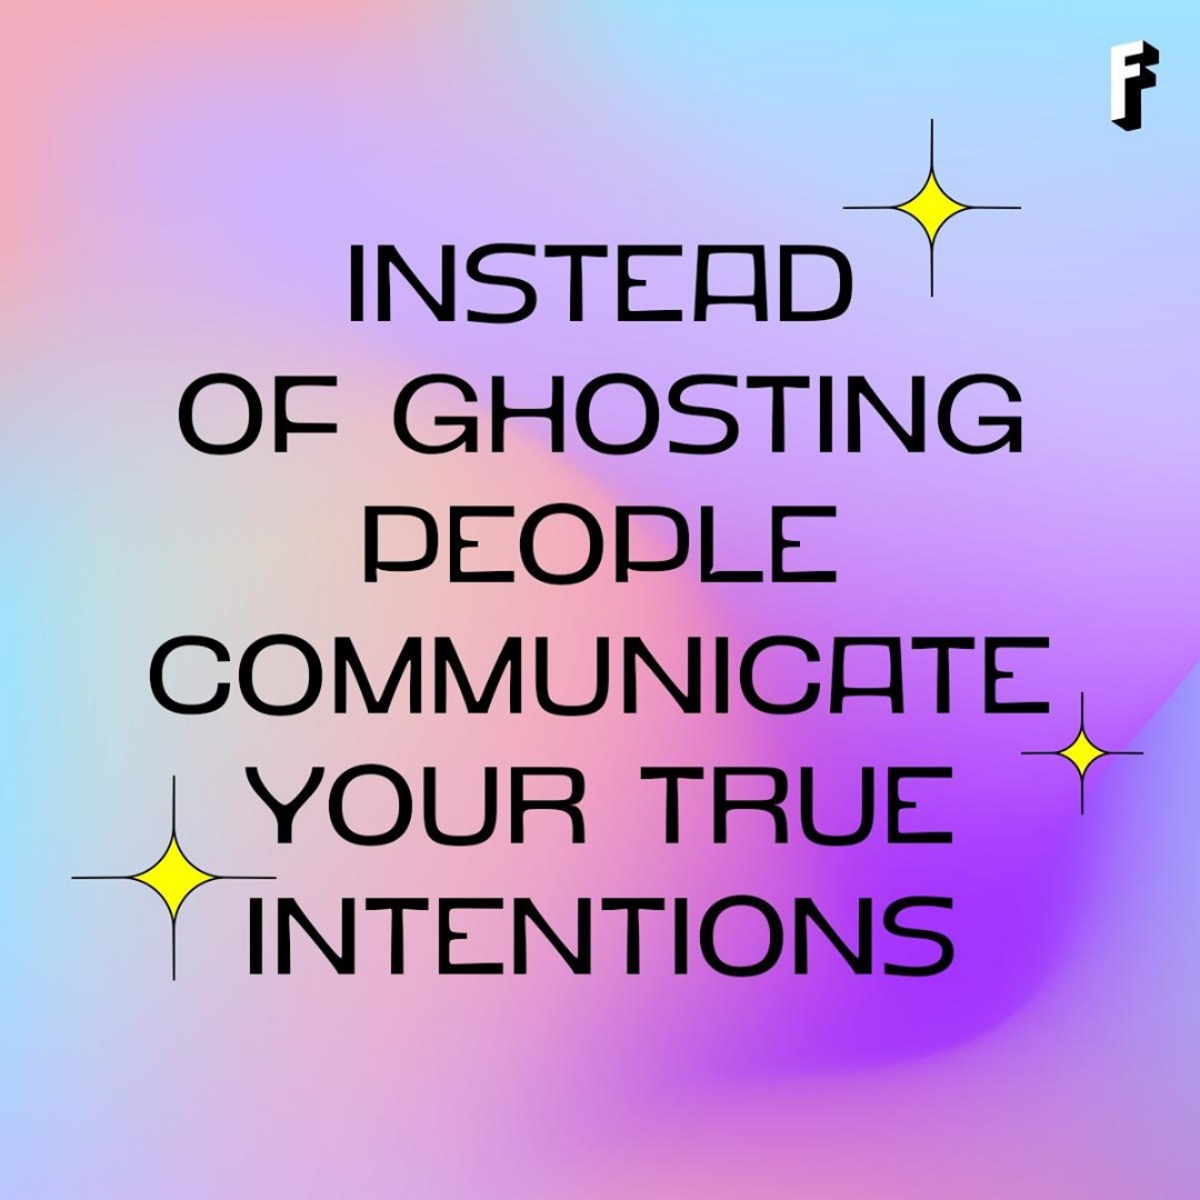 songs about ghosting ghosting is not cool